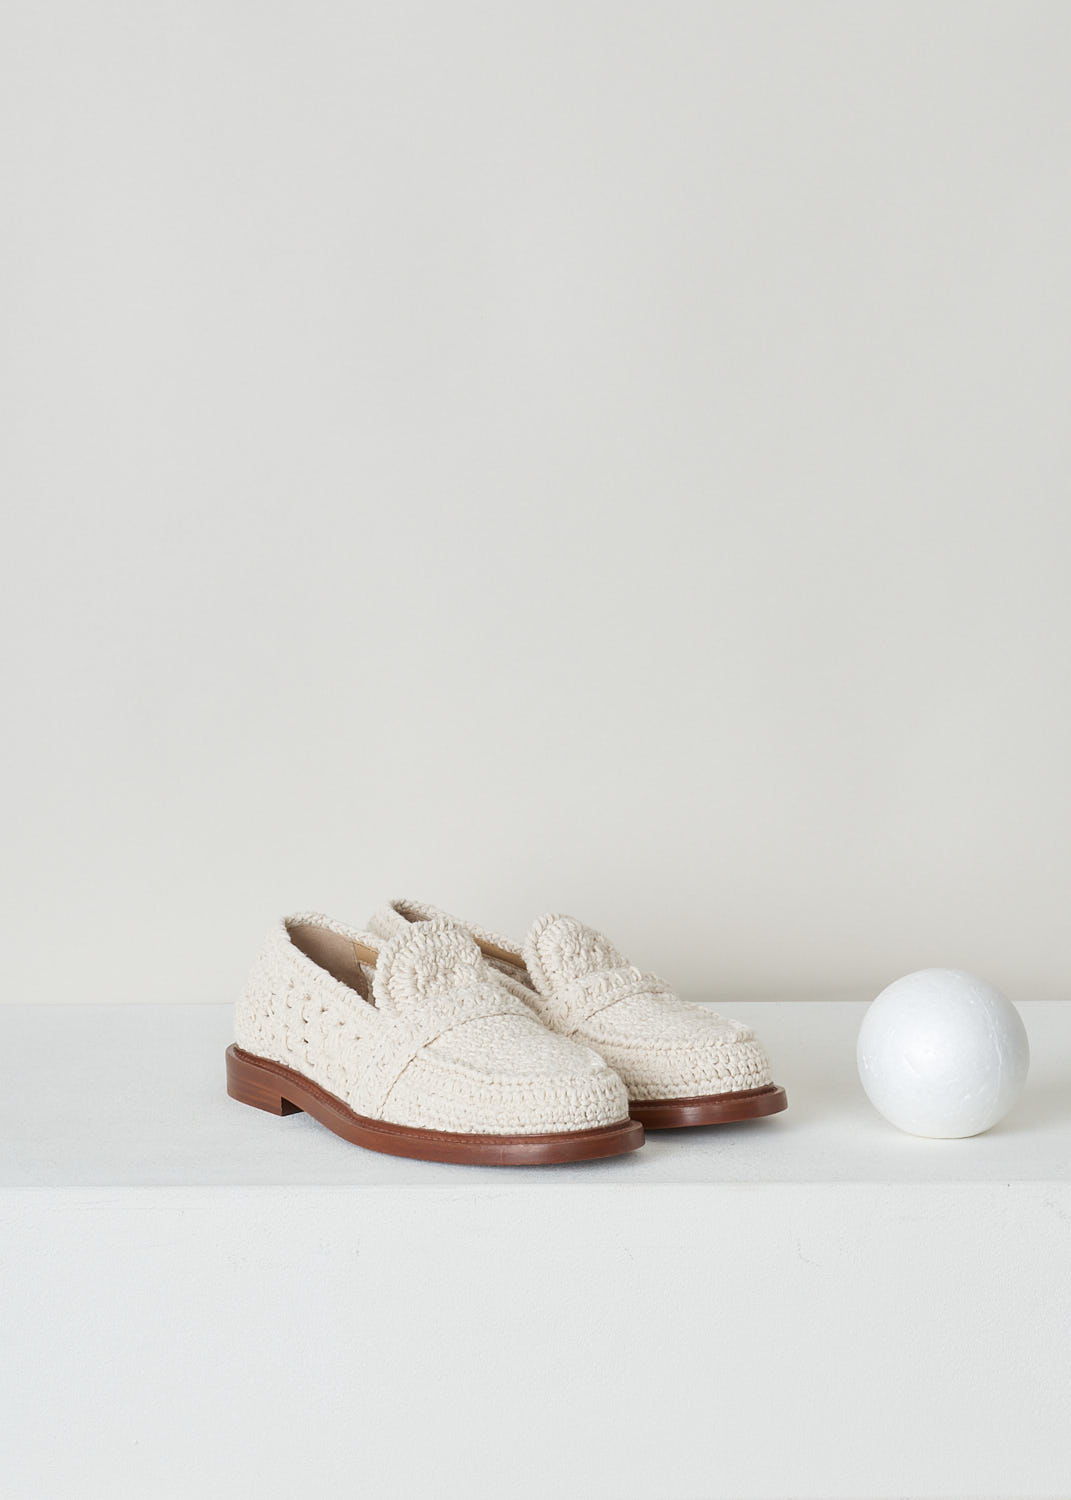 CHLOÃ‰, BEIGE CROCHET LOAFERS, 
CHC22S584X0122_KALYA_FLAT_LOAFERS_122_EGGSHELL, Beige, Front, These beige crochet loafers have a slip-on style with a round toe. The shoes have a sleek brown sole.
